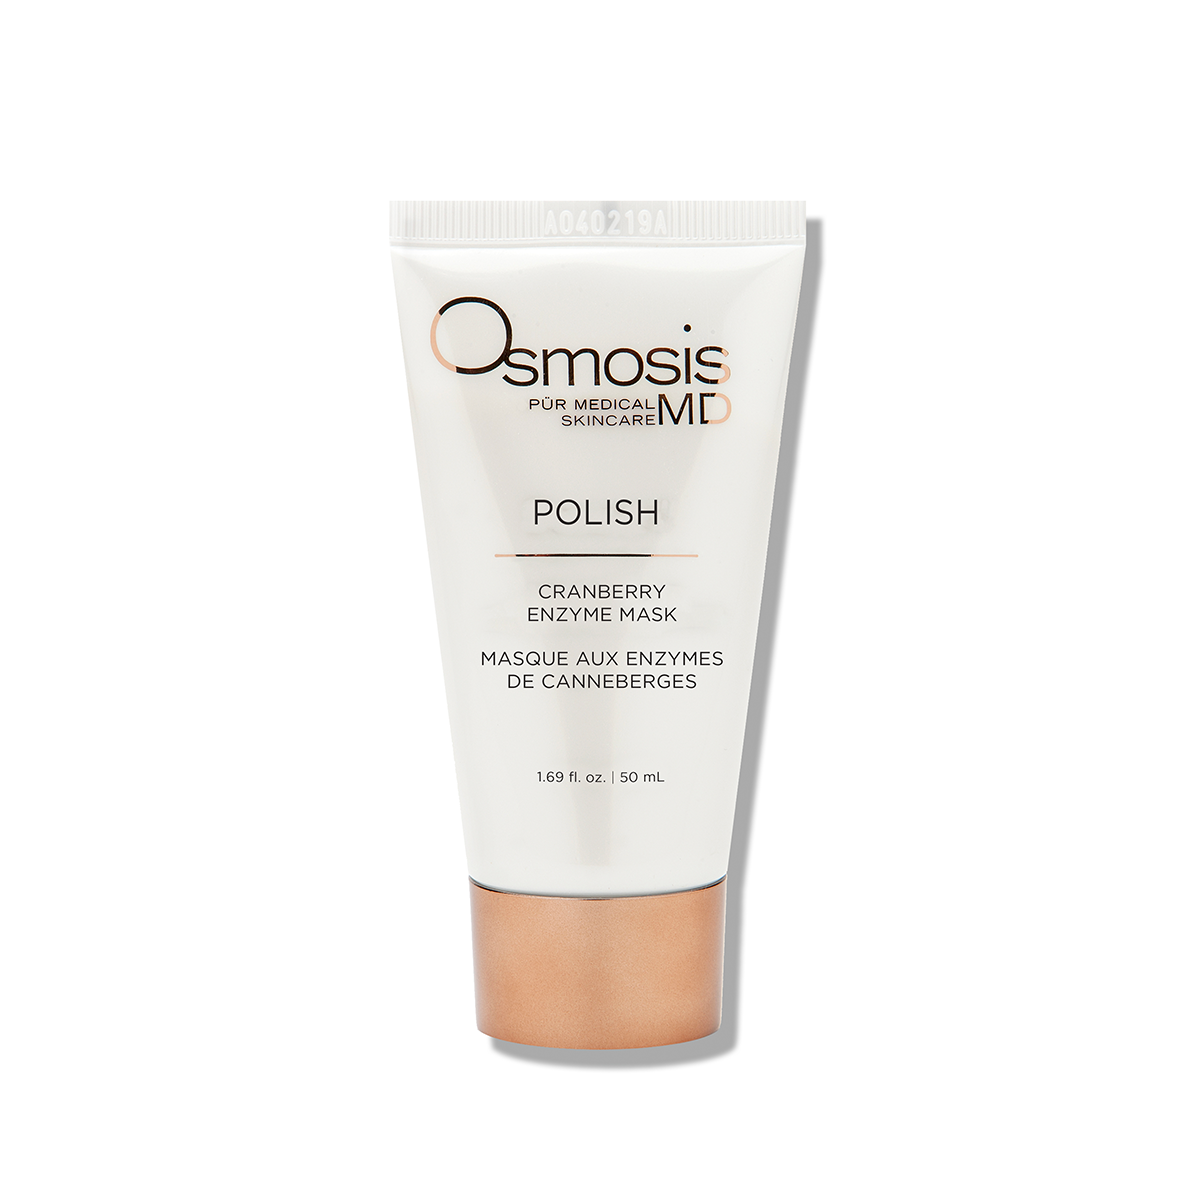 Osmosis MD Polish Enzyme Mask: White tube with gold and black text, skincare product. Gently exfoliates, infuses antioxidants, firms, and smooths skin. Ideal for aging, sensitive, dry skin types.